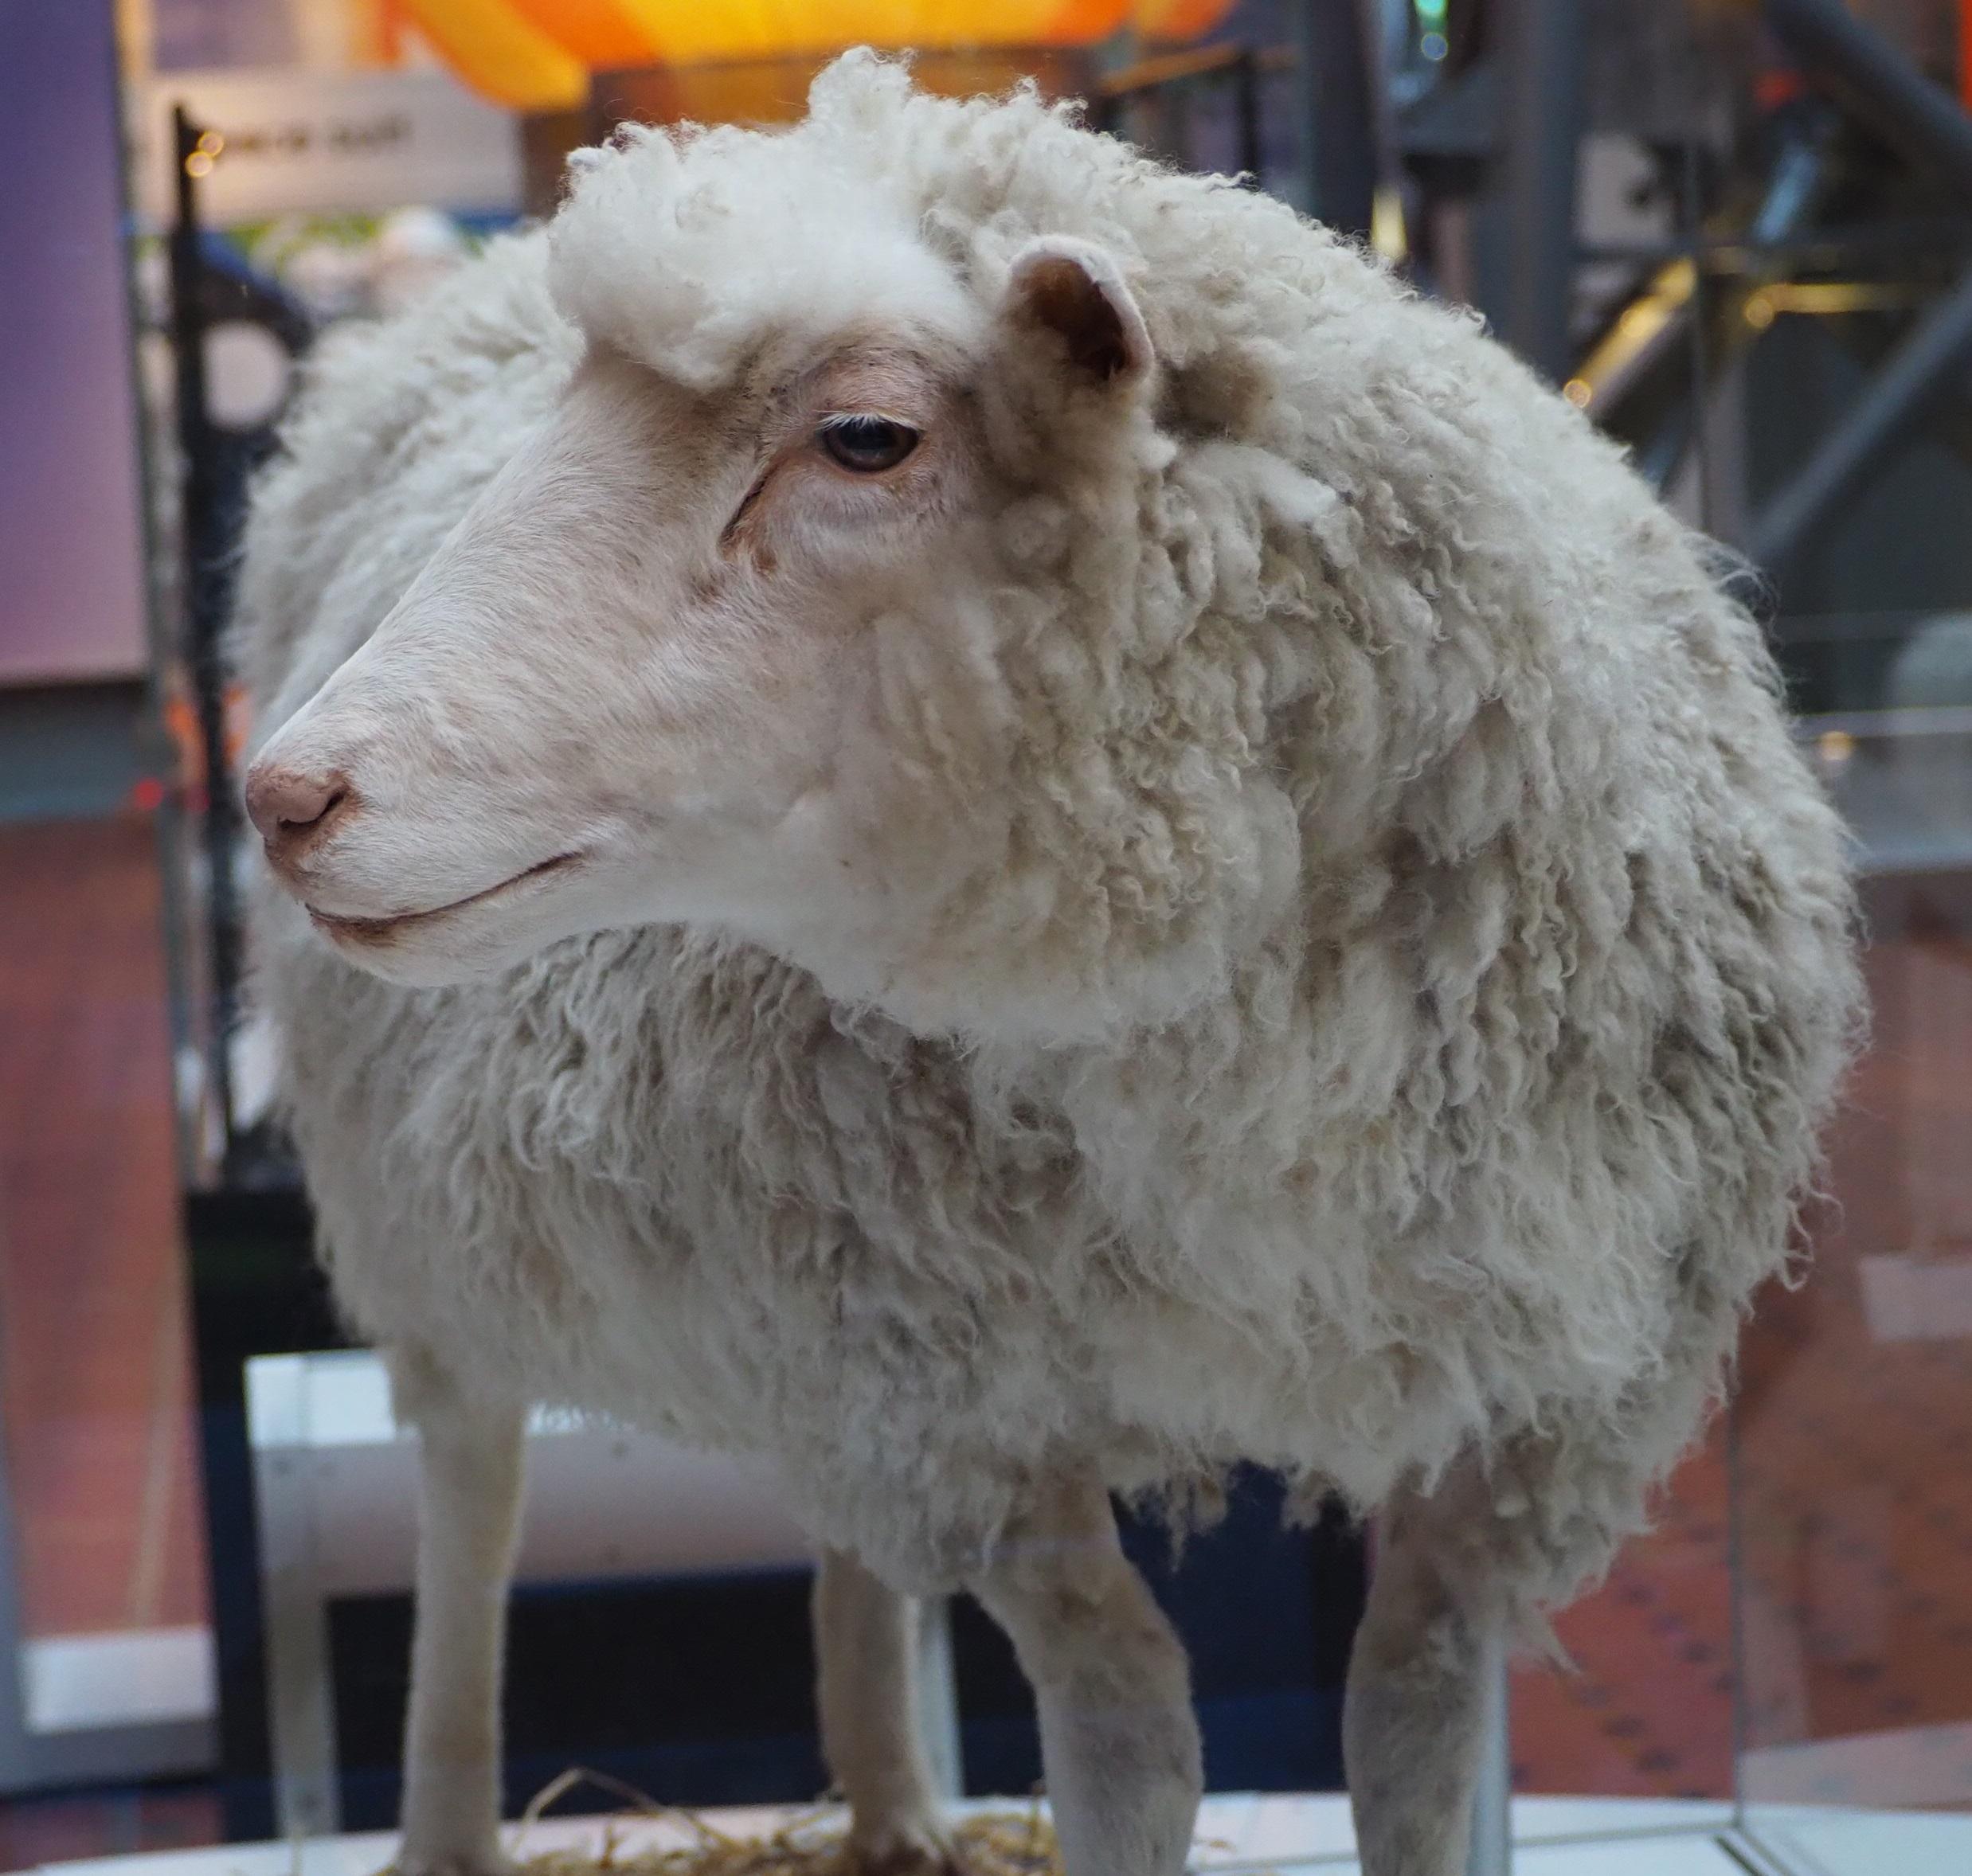 A taxidermied sheep.